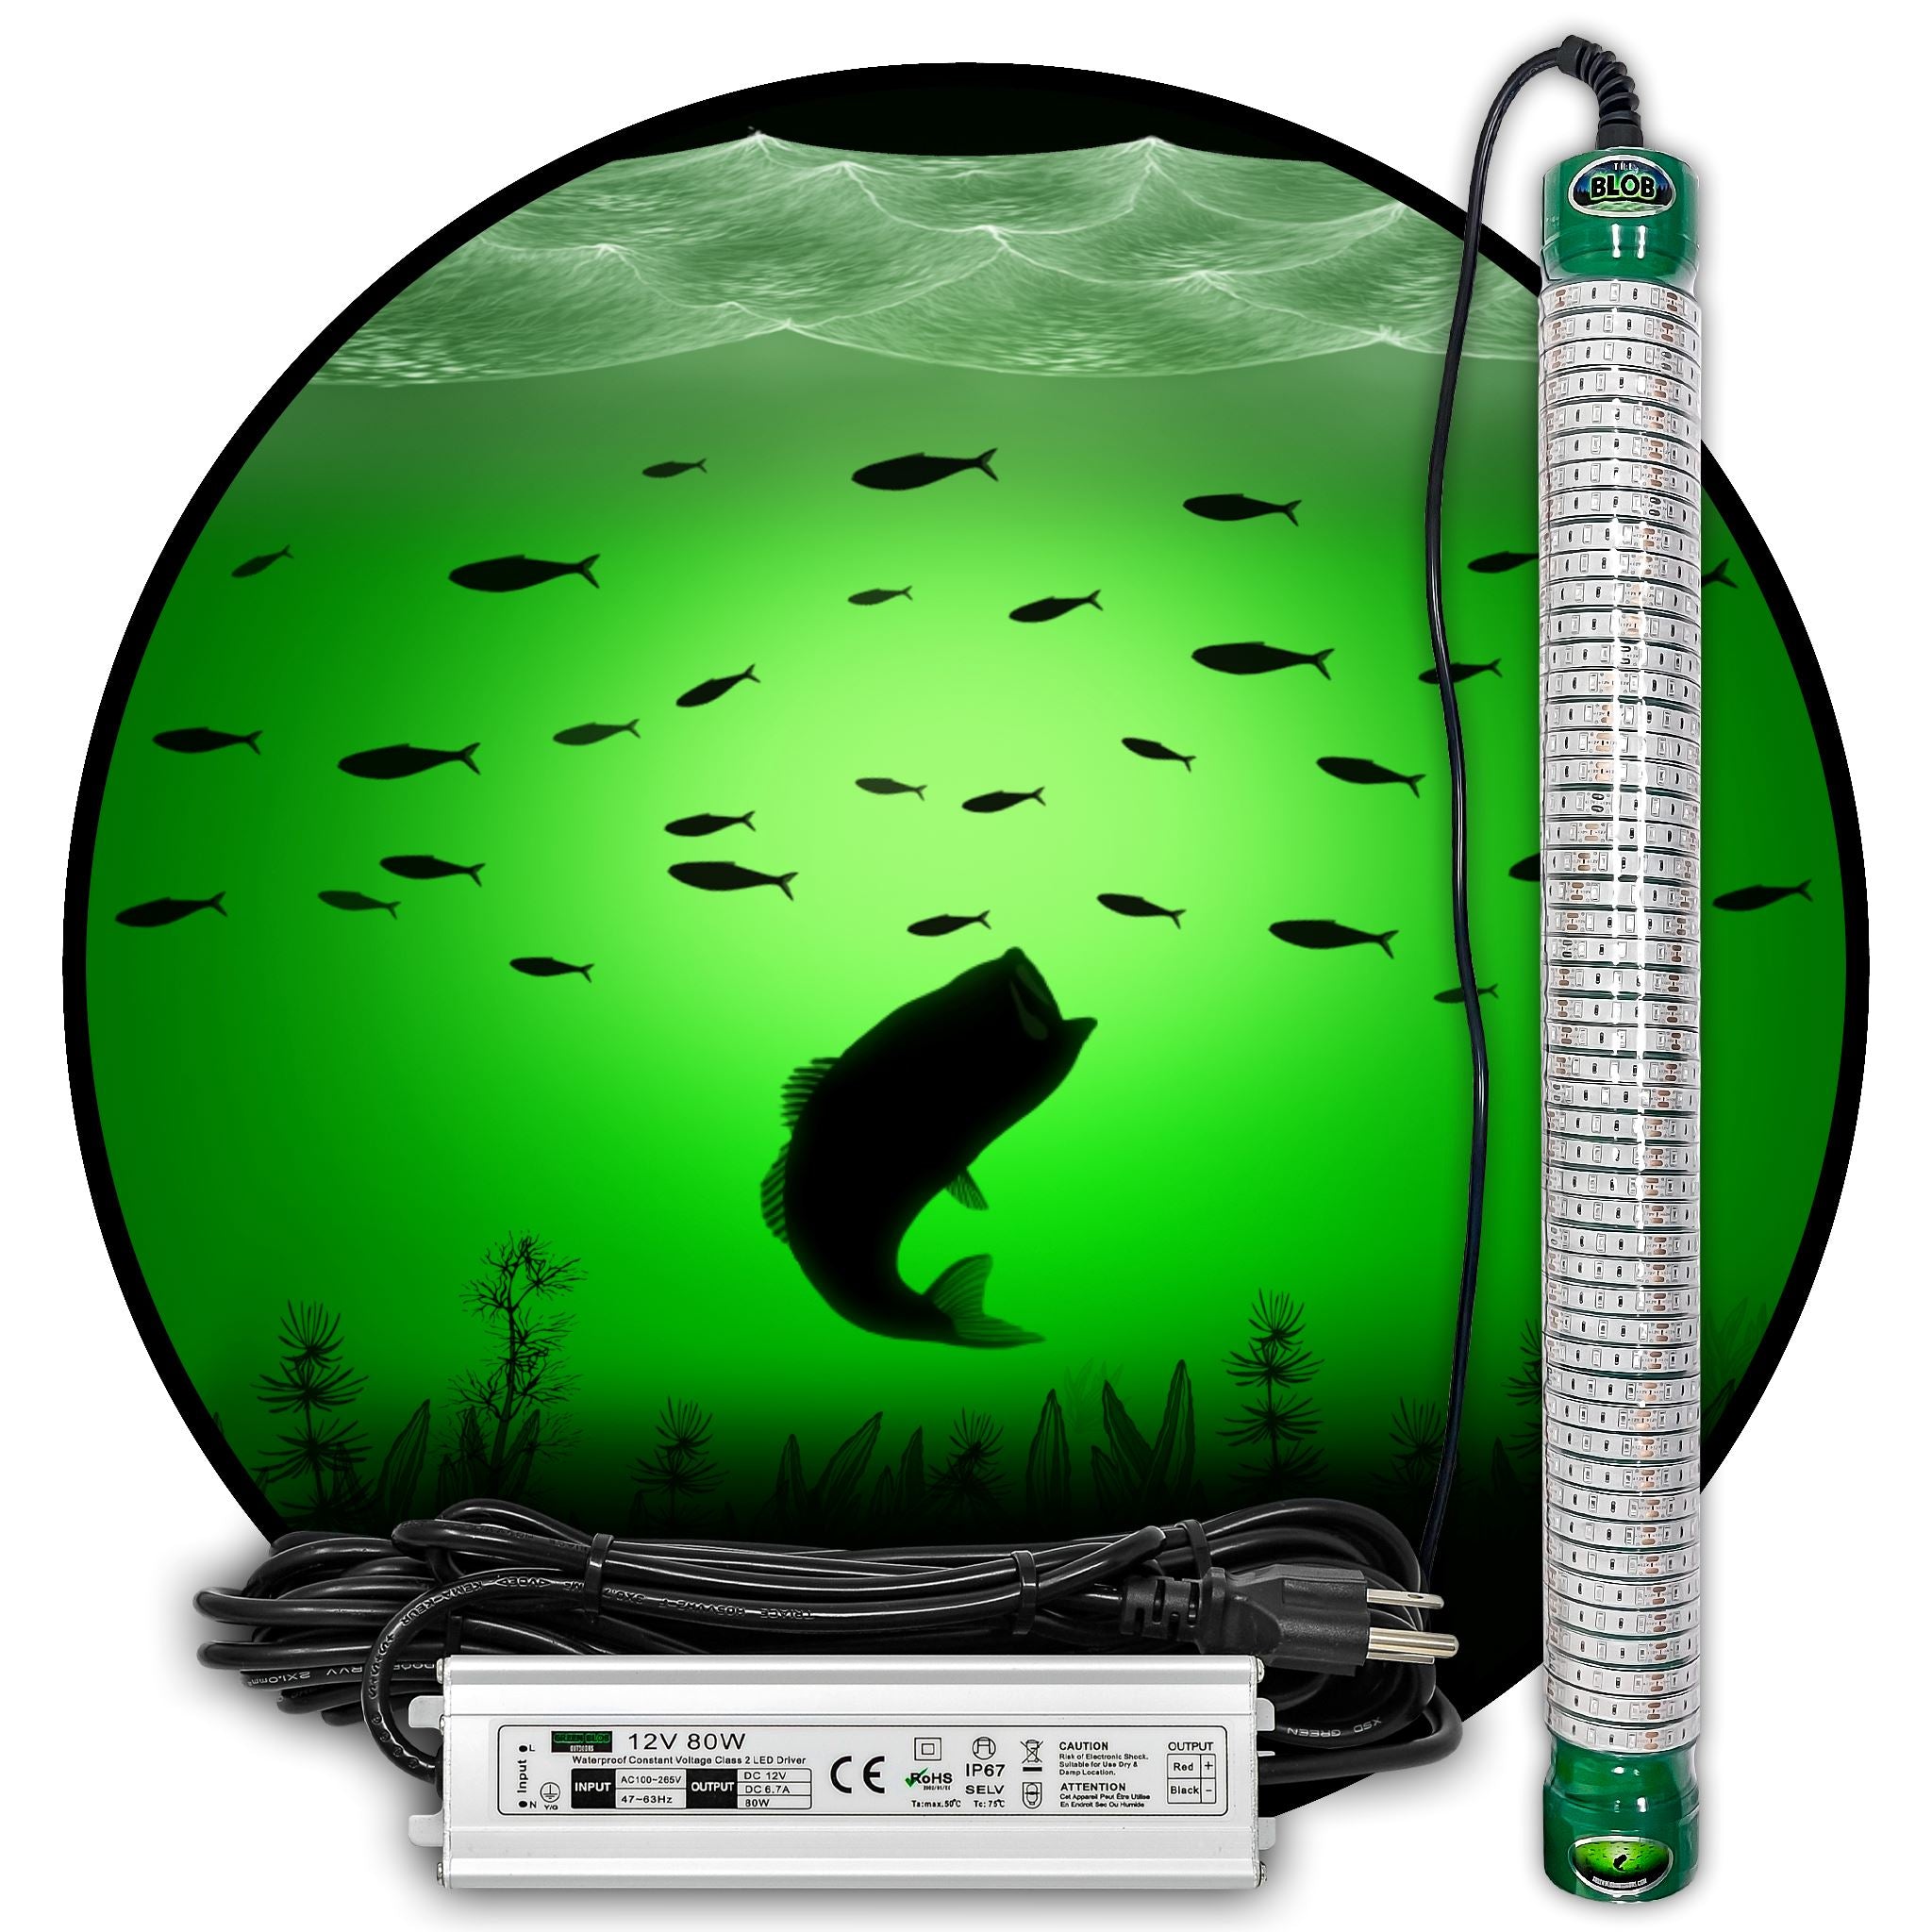  Green Blob Outdoors Jumbo 30000 Lumens 600 LED Underwater  Fishing Light 110 Volt AC 3 Prong Plug Includes Timer w Photocel 30ft Power  Cord (Choice of Green, Blue, or White) (